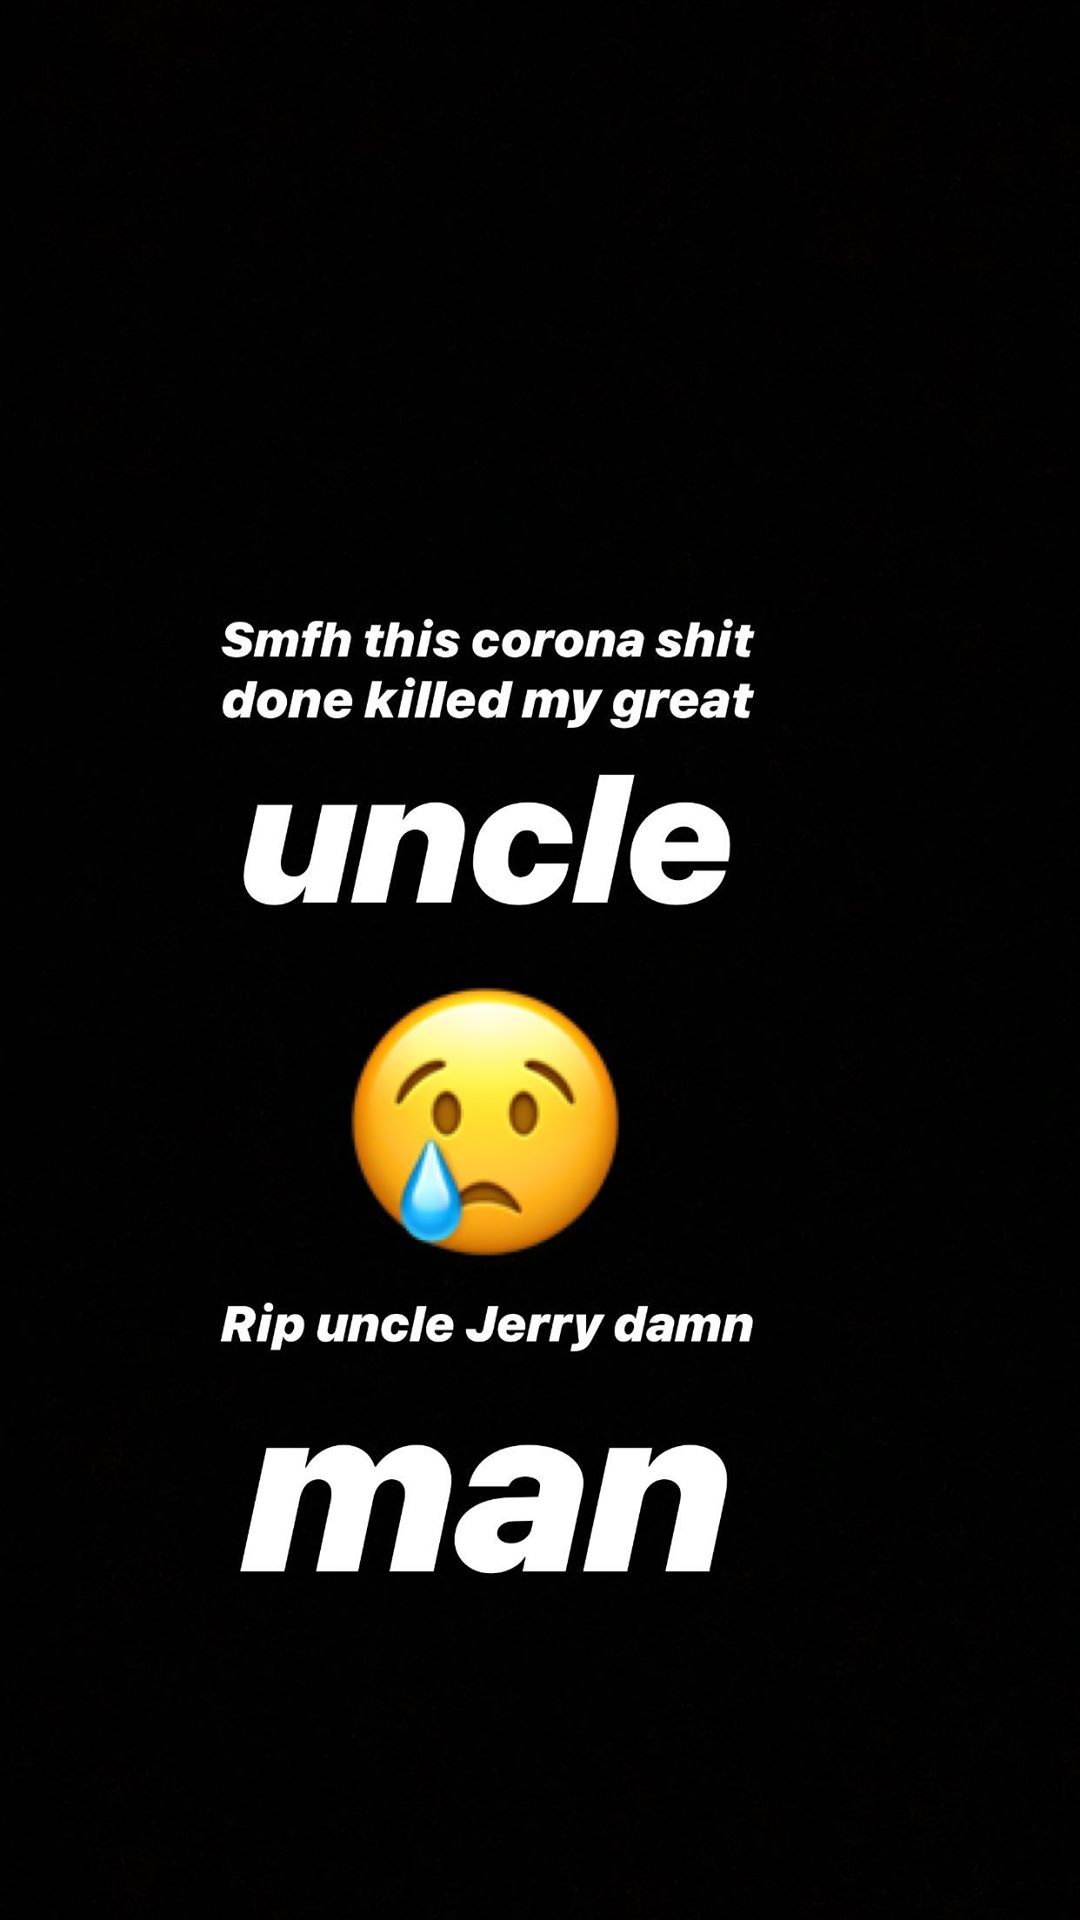 Offset Mourns The Loss Of His Great Uncle Due To Coronavirus